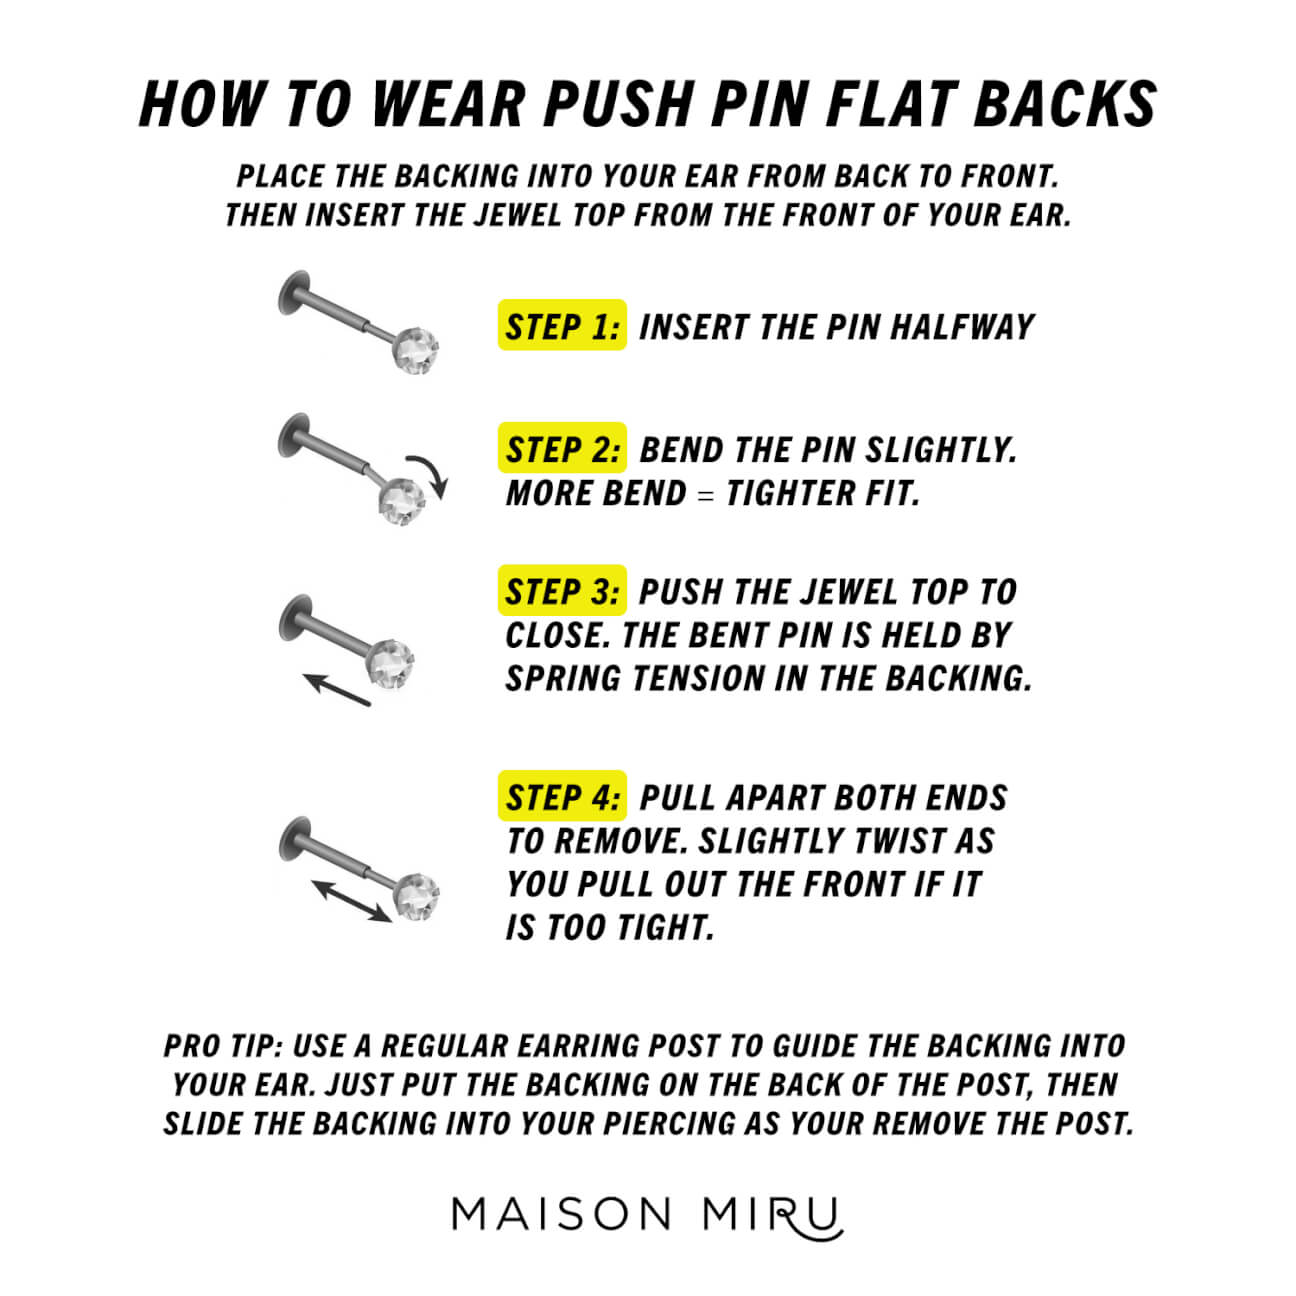 How to Wear the Pave Moon Push Pin Flat Back Earring